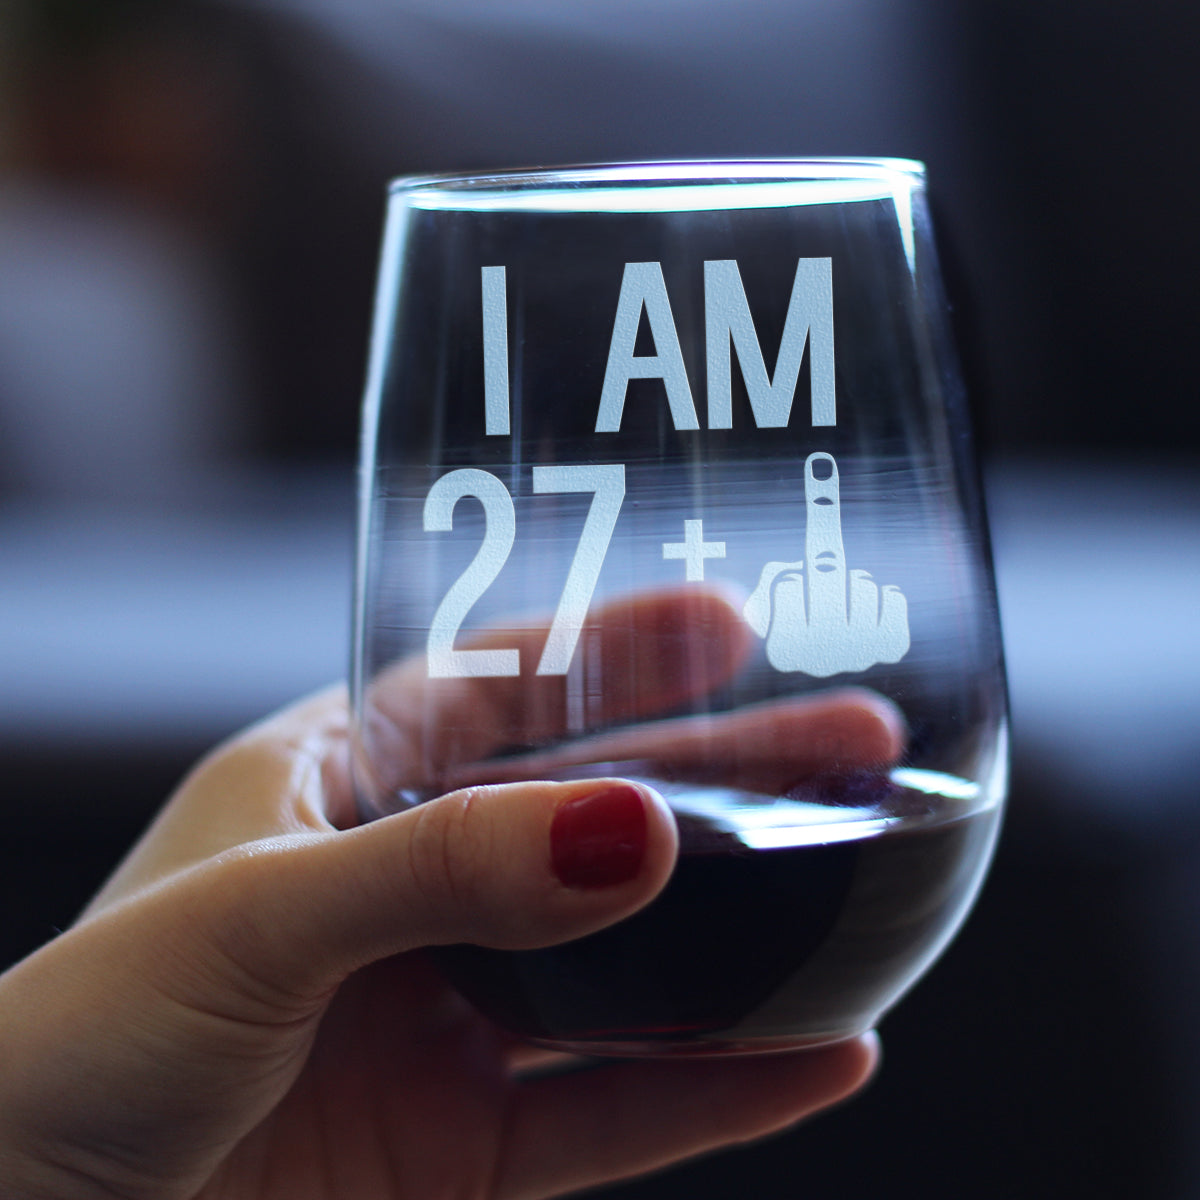 27 + 1 Middle Finger Funny Stemless Wine Glass, Large 17 Ounce Size, Etched Sayings, 28th Birthday Gift for Women Turning 28